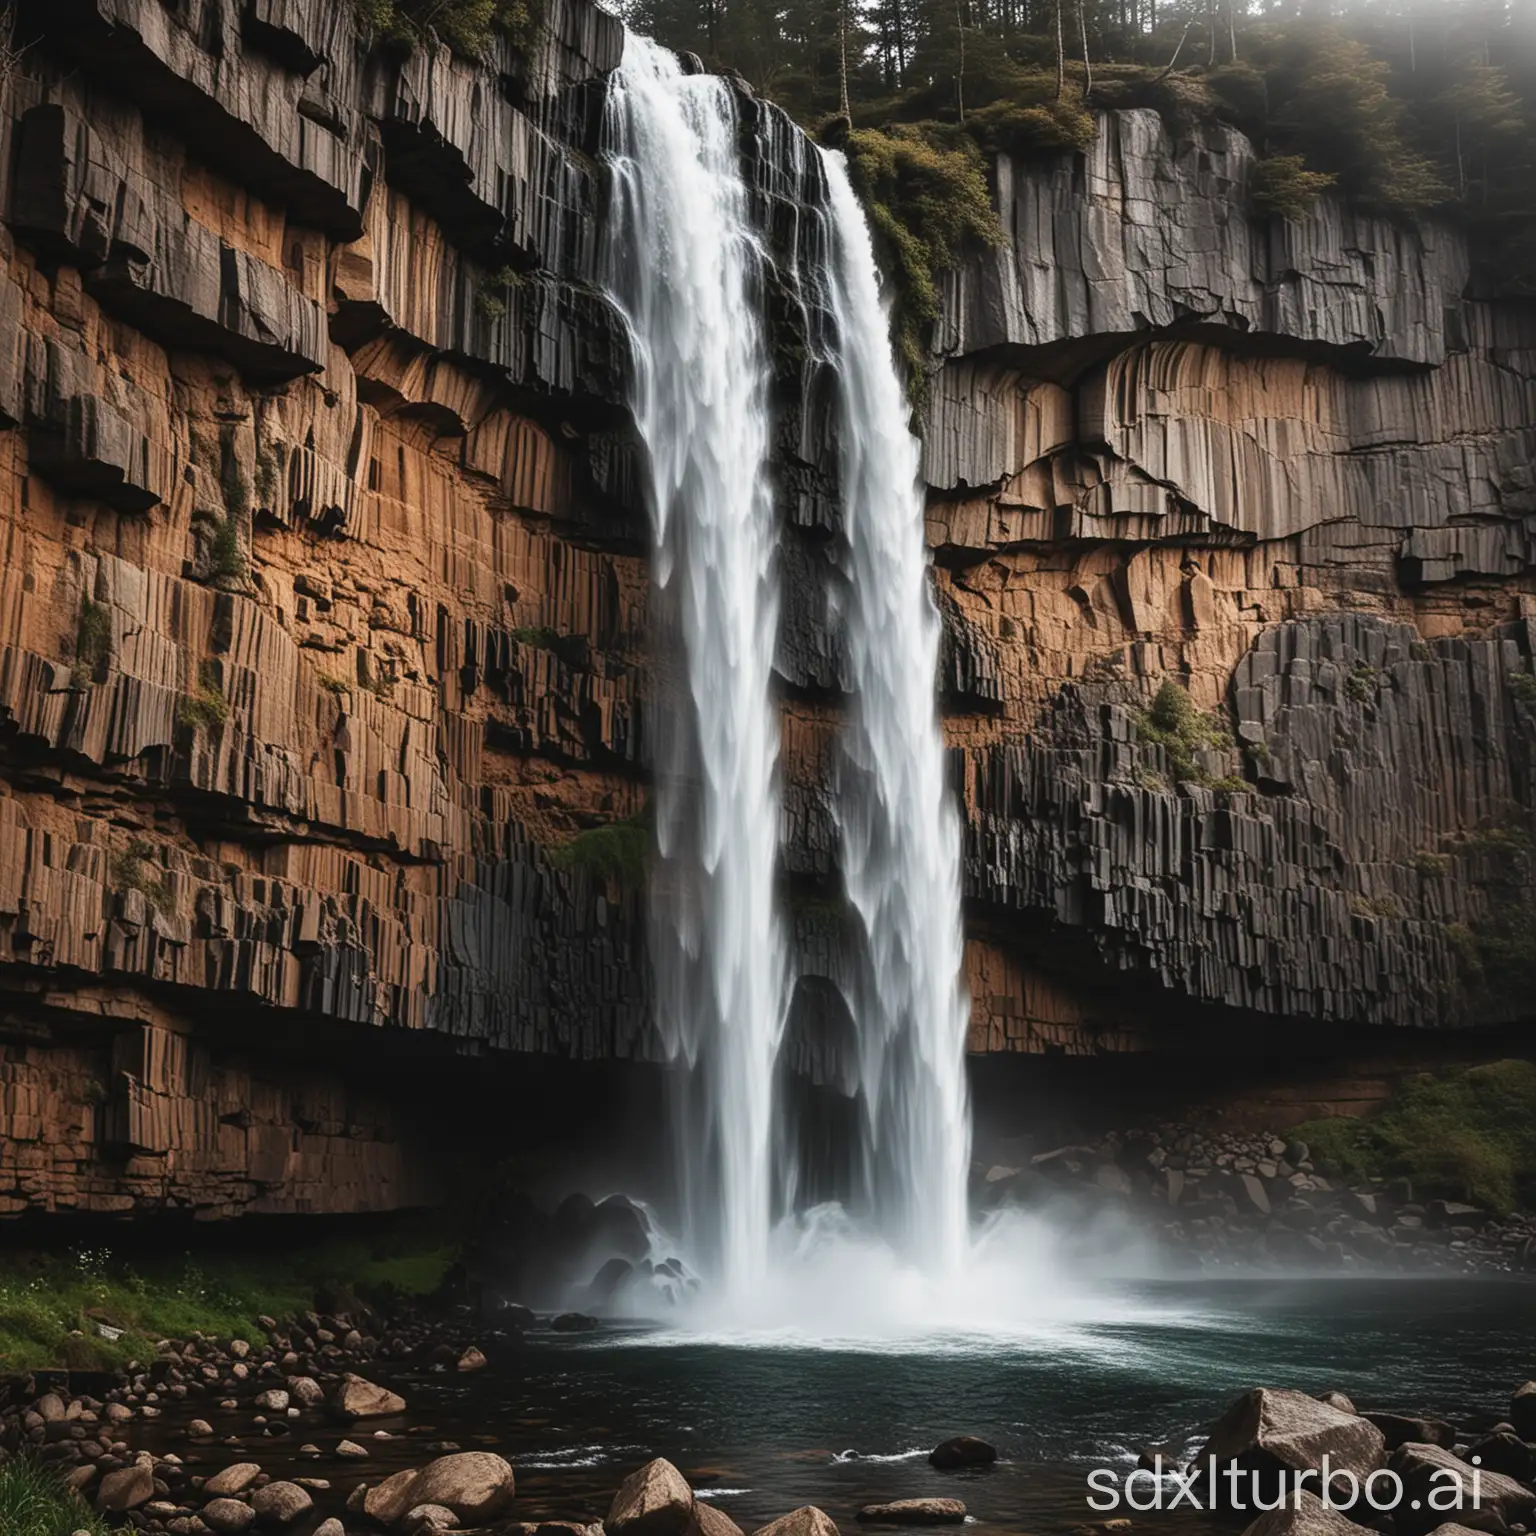 ramatic shot of a powerful waterfall cascading over a rocky cliff face.